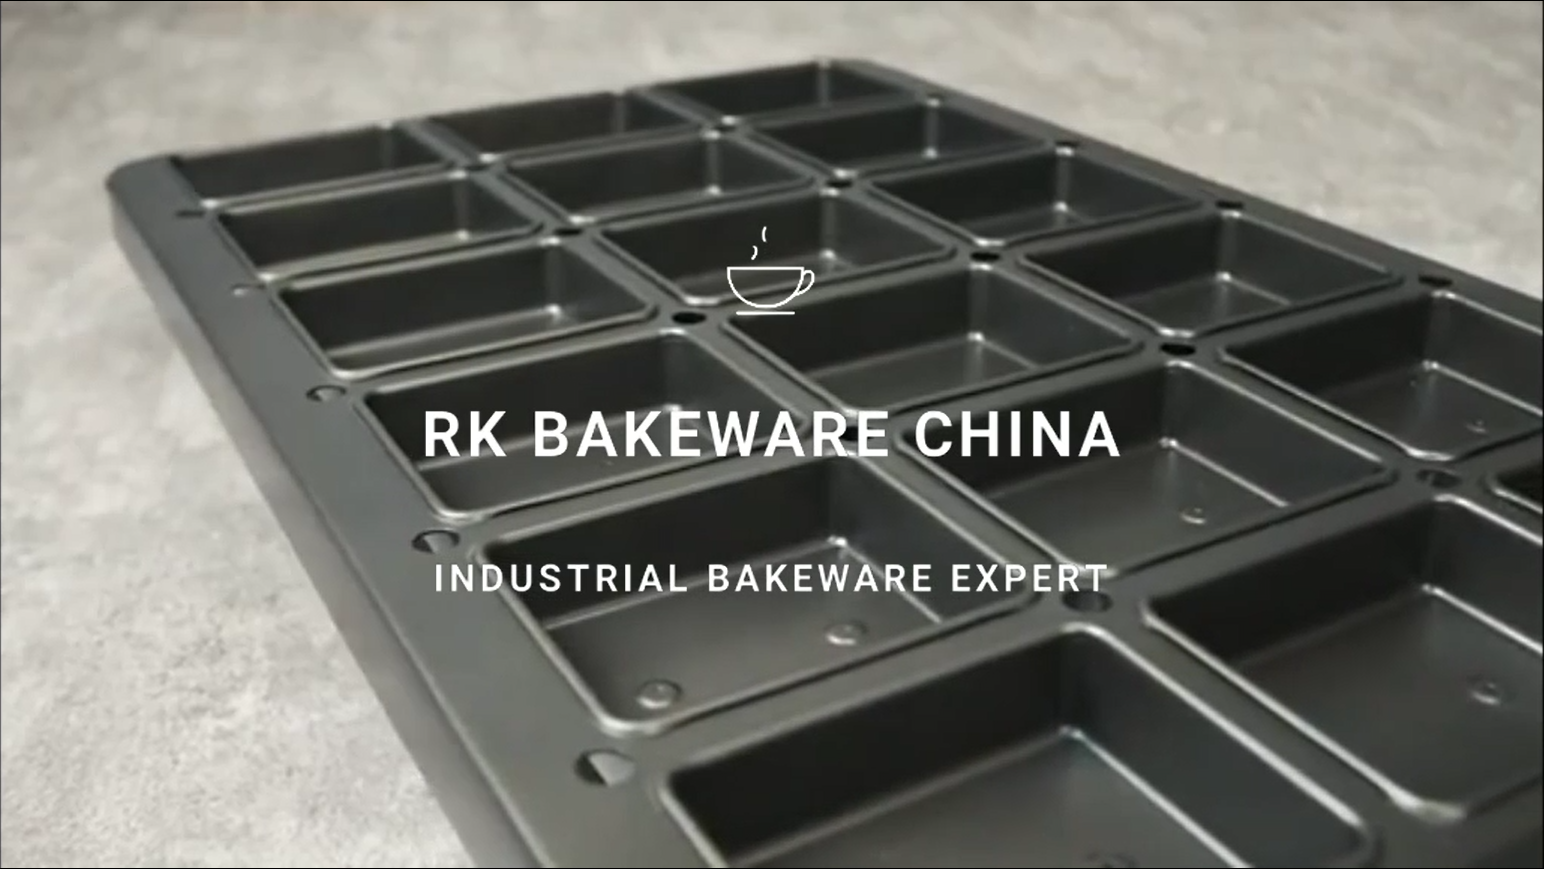 RK Bakeware China-Nonstick Alusteel Square Muffin Tray For Industrial Bakeries